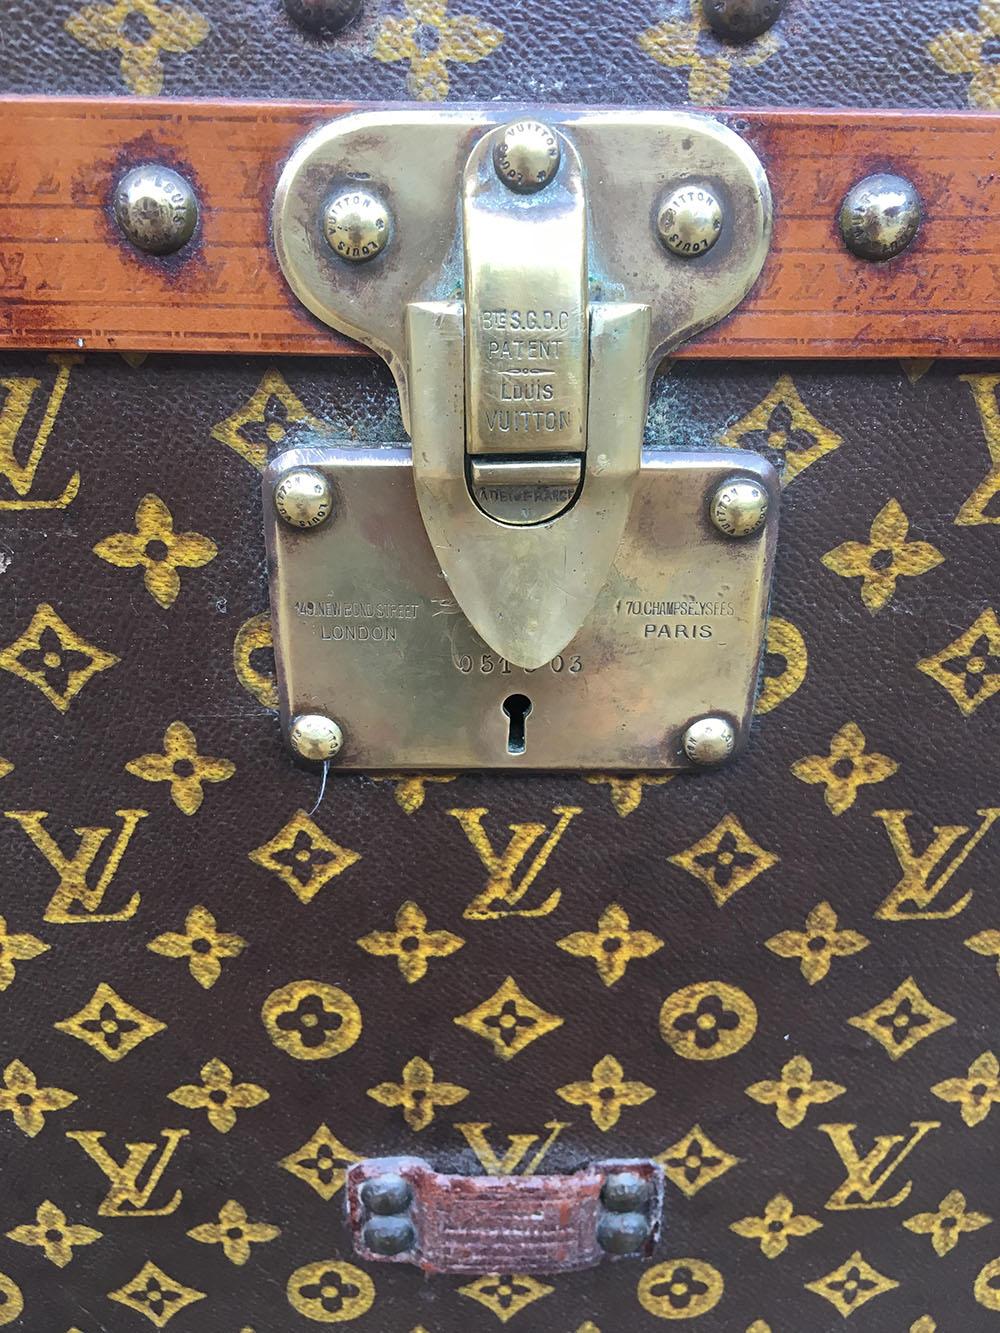 Louis Vuitton Antique Monogram Small Steamer Trunk with Basket Tray c1920s 1